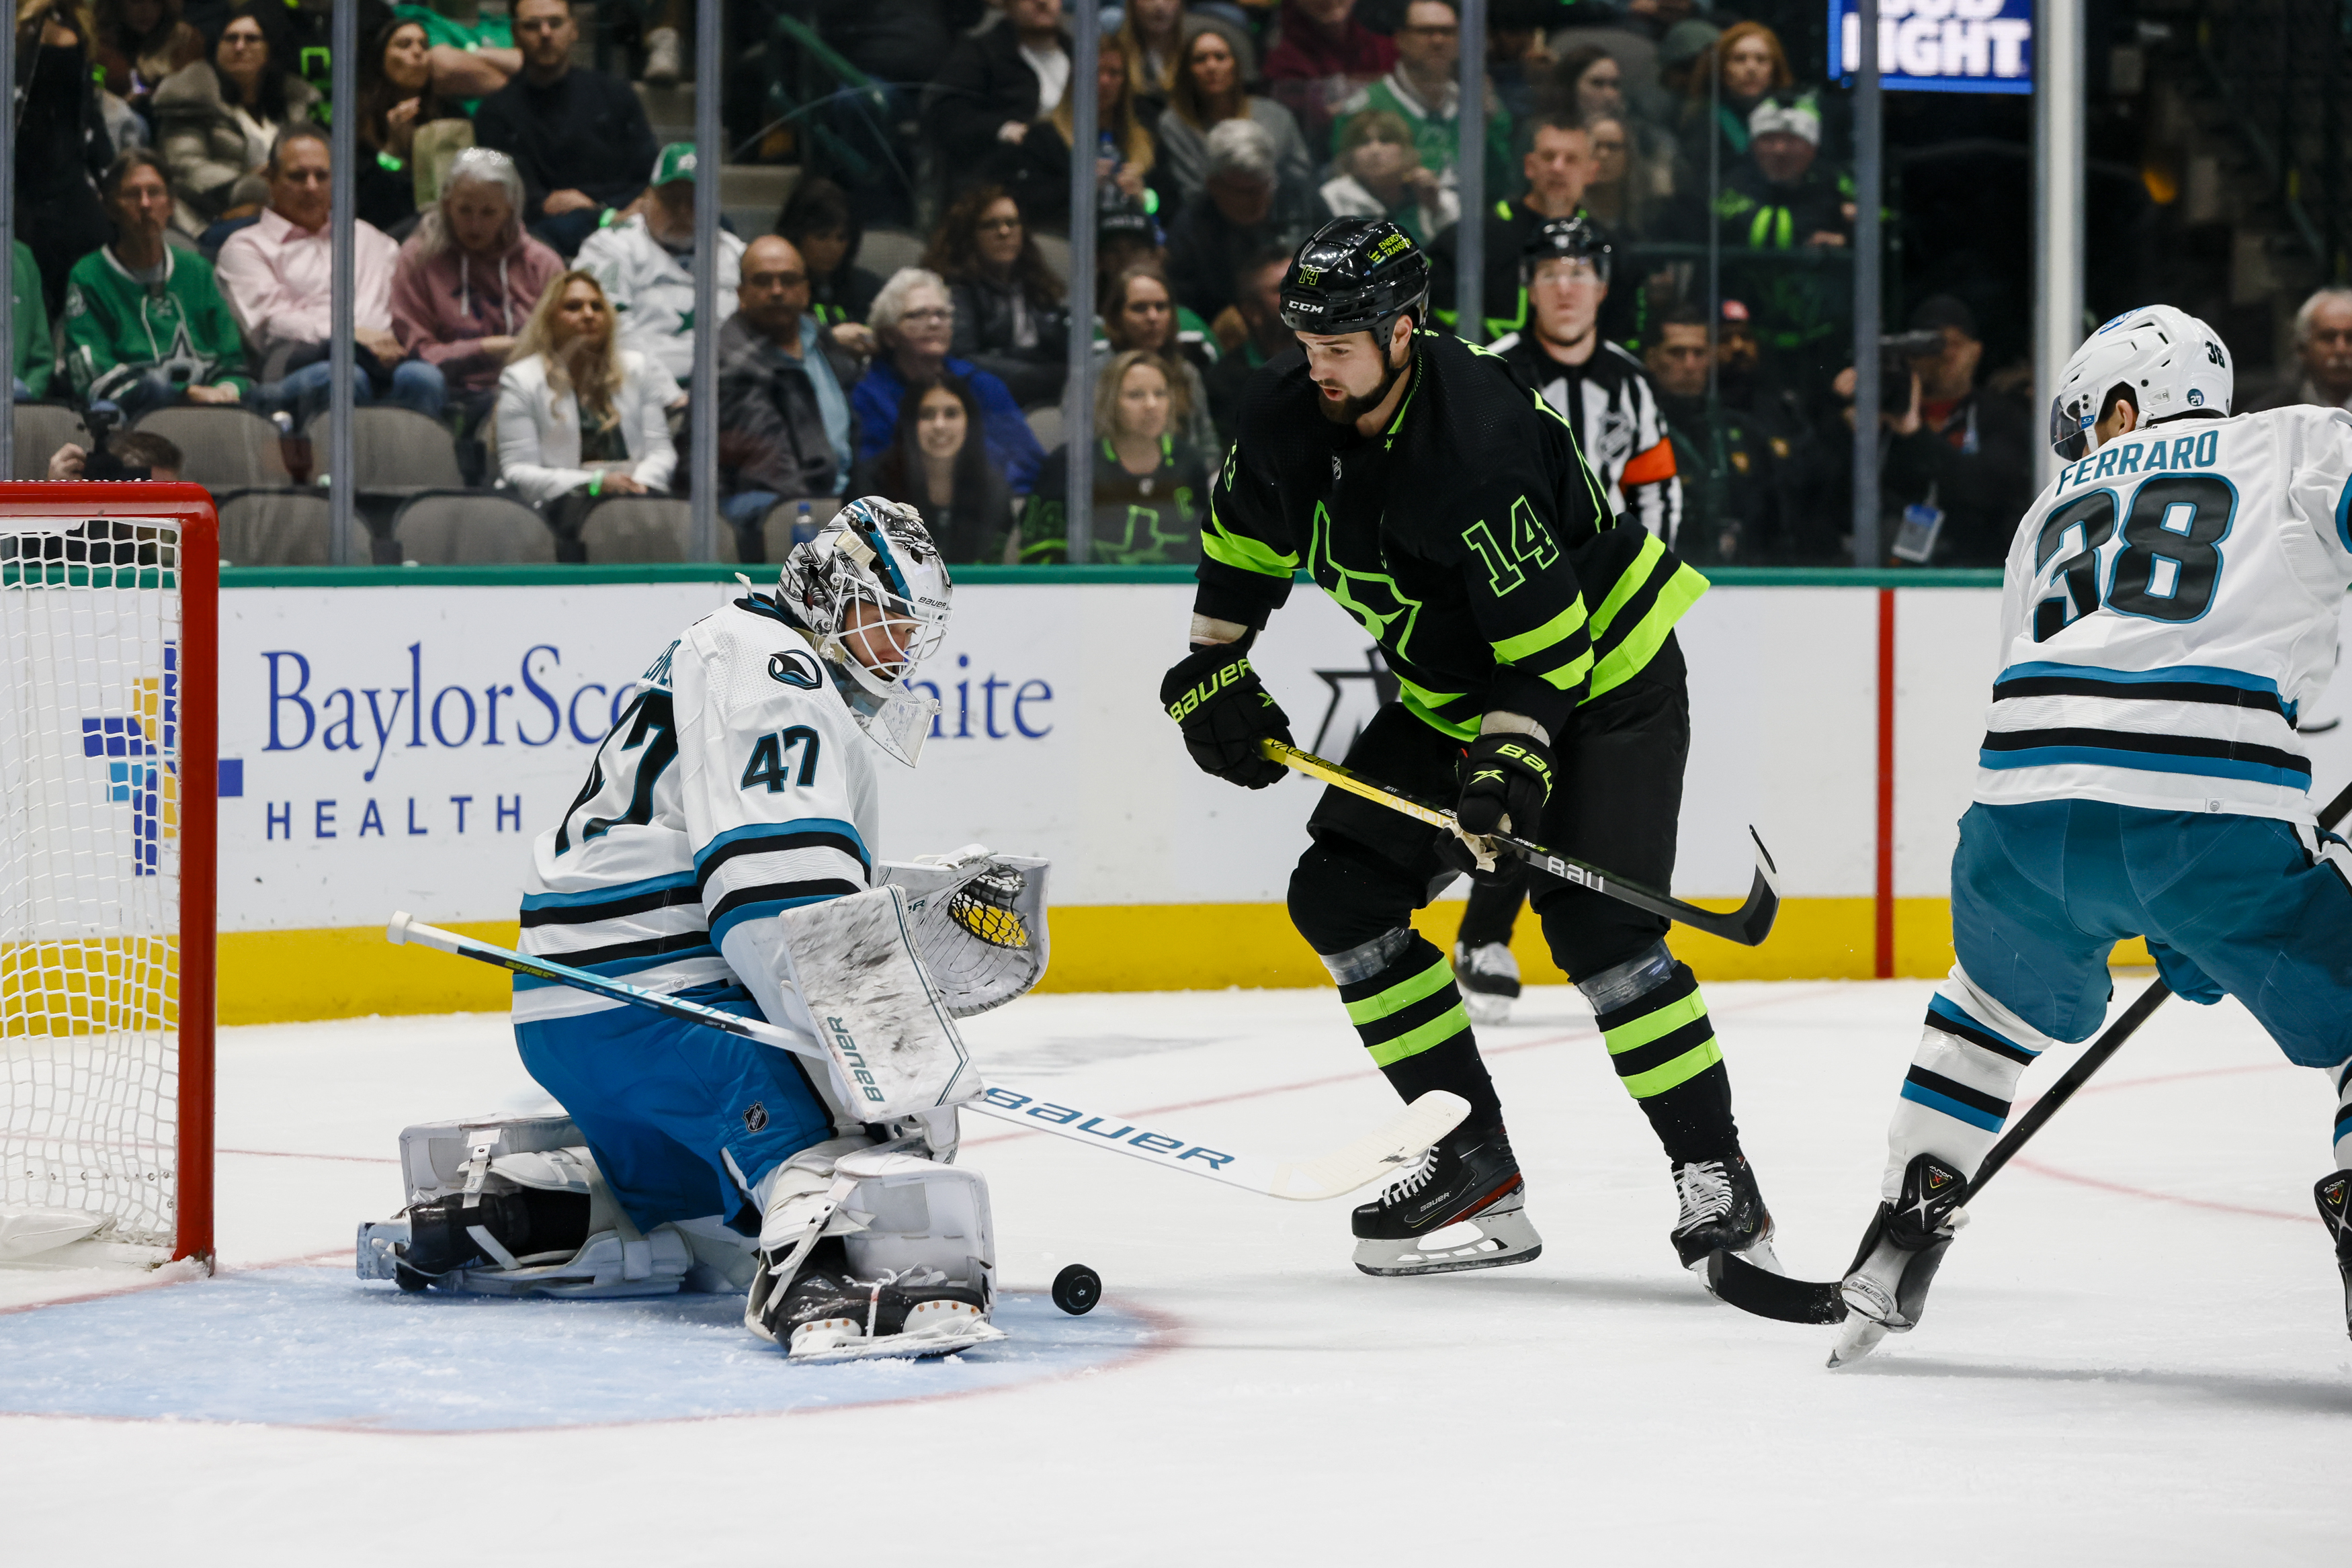 San Jose Sharks goaltender James Reimer (47) blocks a shot from Dallas Stars left wing Jamie Benn (14) during the game between the Dallas Stars and the San Jose Sharks on December 31, 2022 at American Airlines Center in Dallas, Texas.